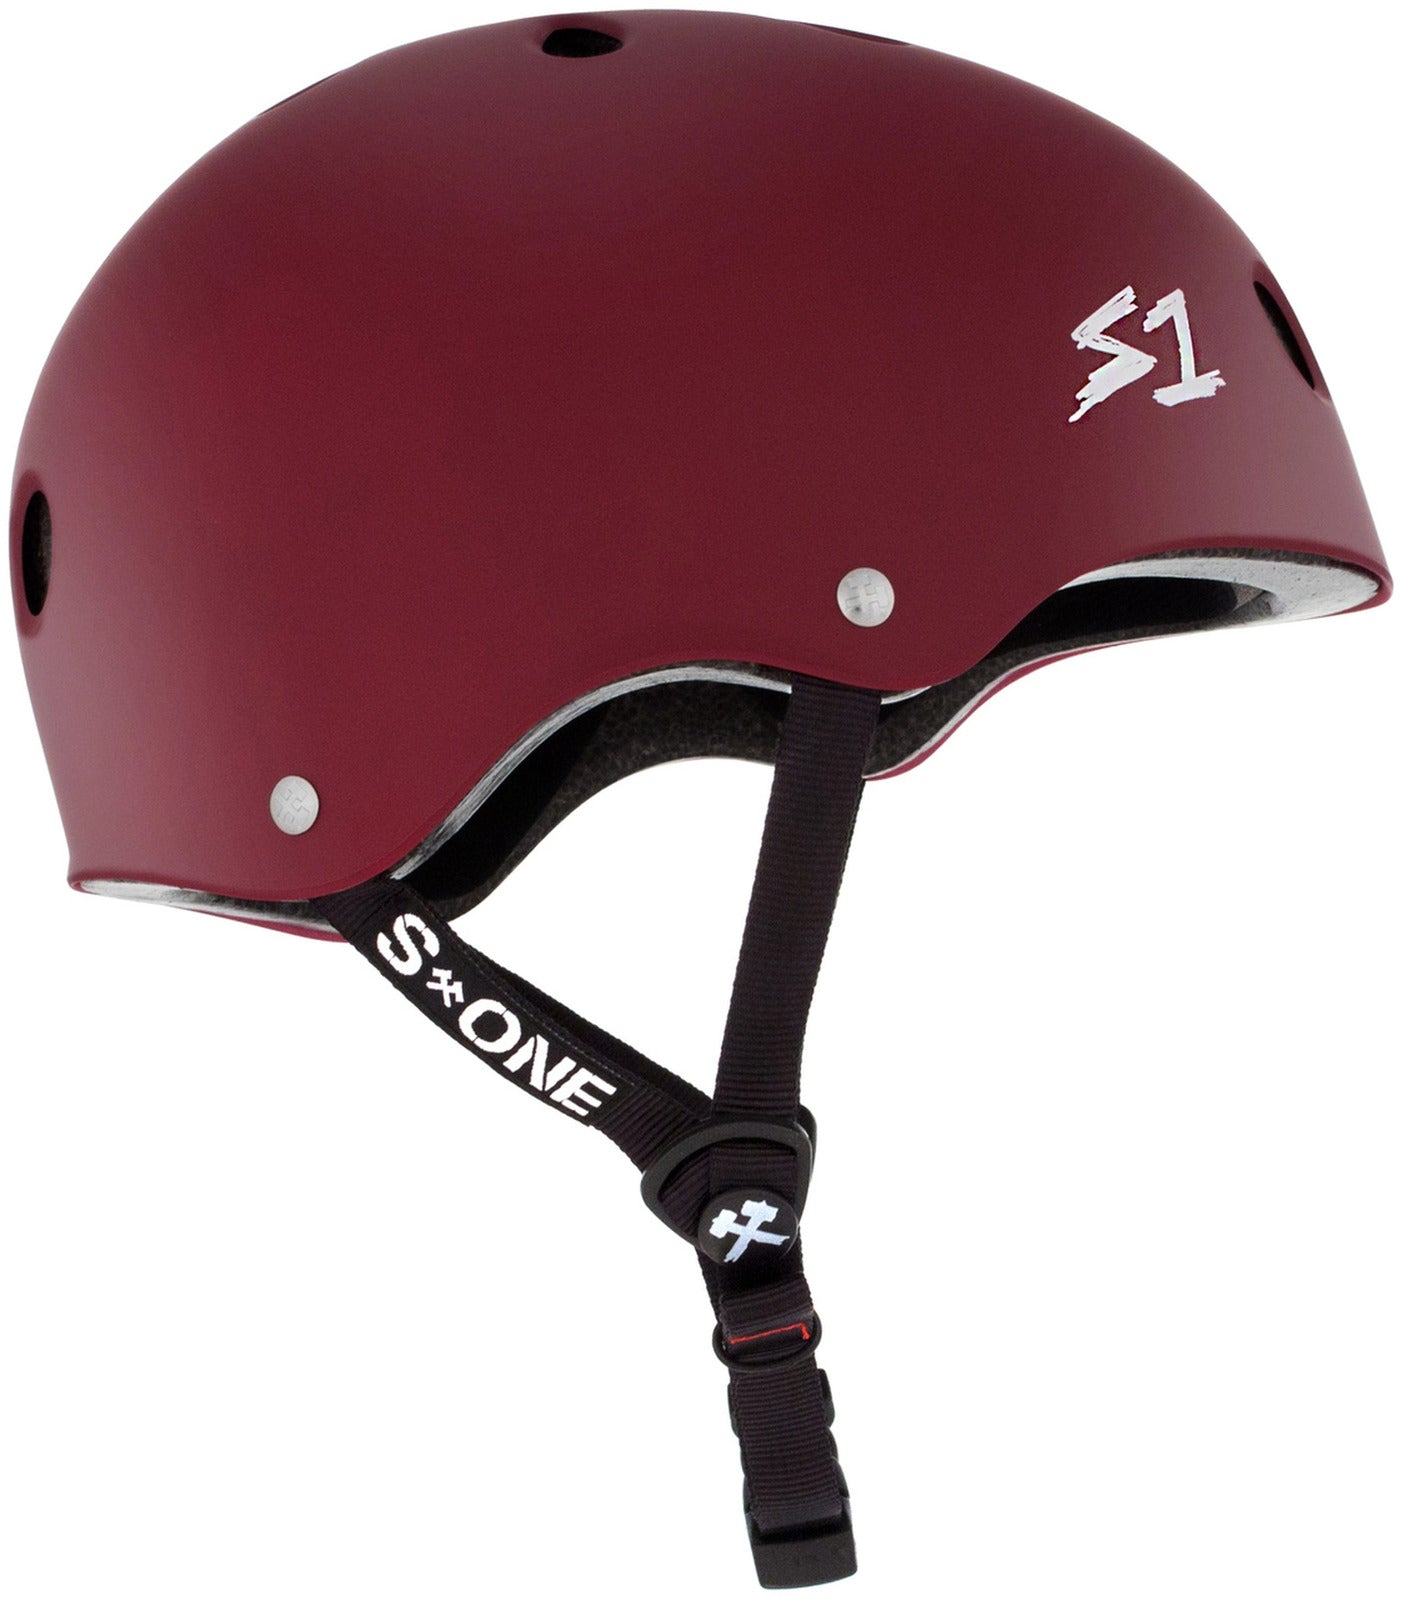 A Maroon S-One Lifer Helmet with the word slone on it, designed for head protection and multiple impact resistance.